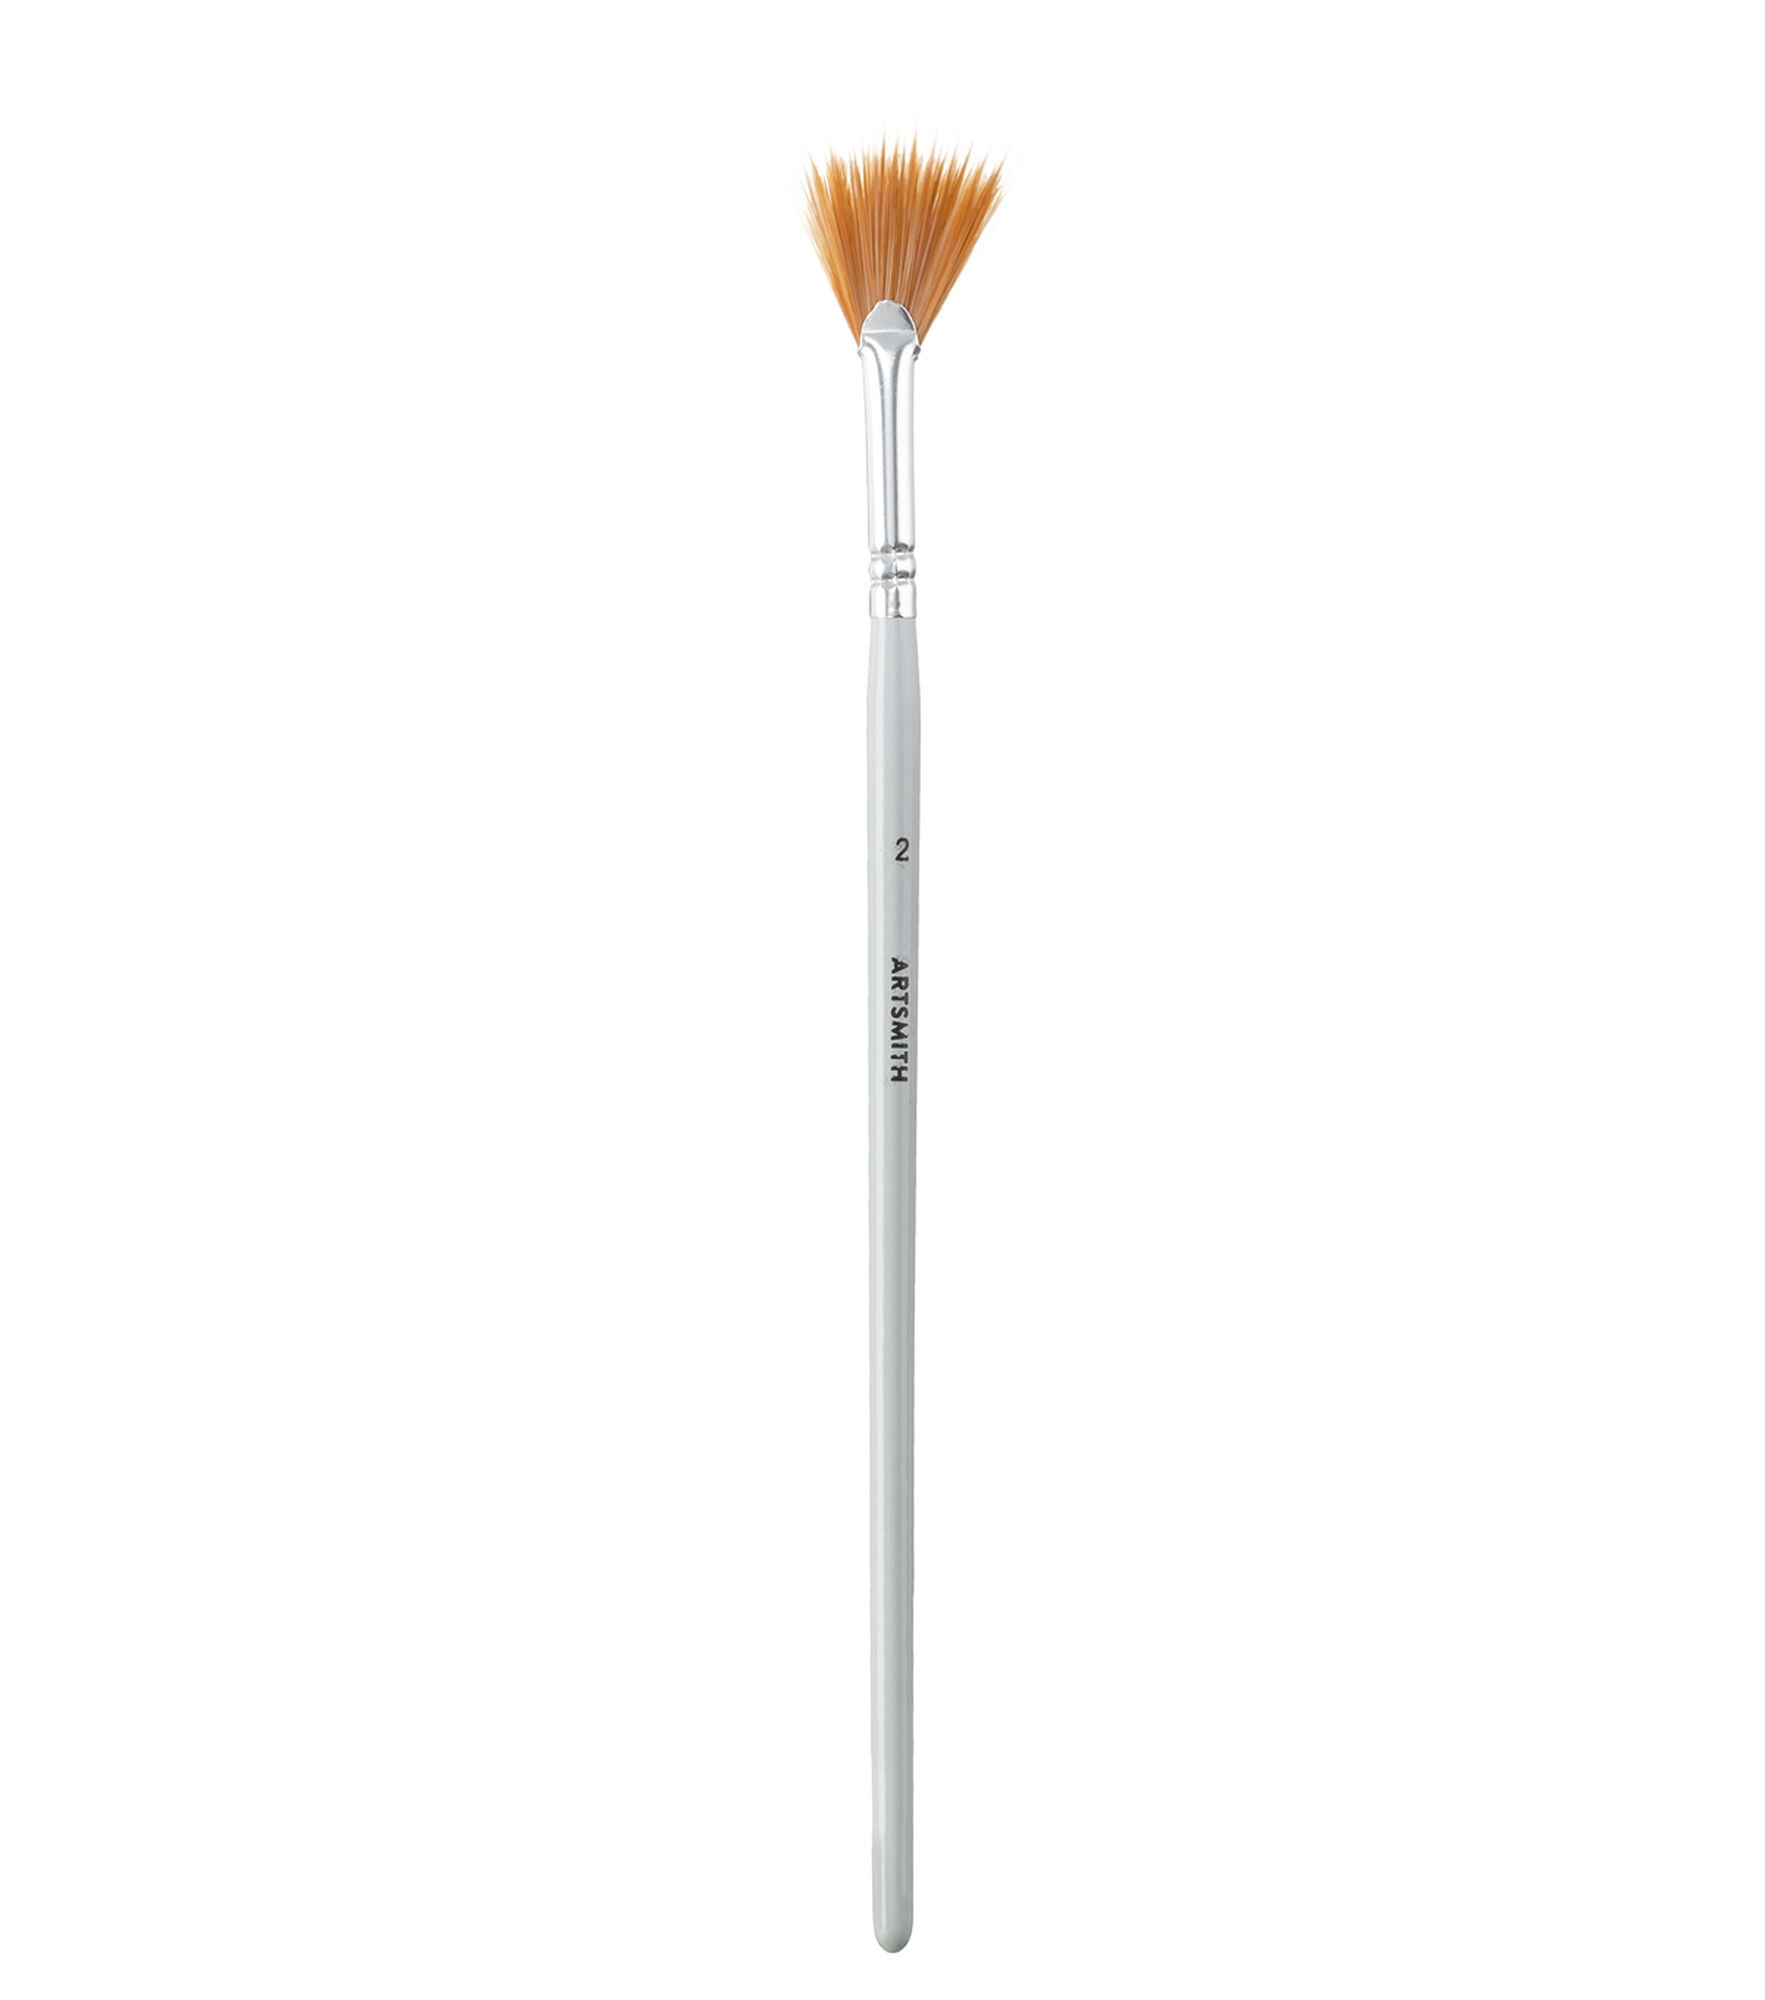 Synthetic Sable Fan Brush - Fan 2 - Multi-Use Paint Brushes - Art Supplies & Painting